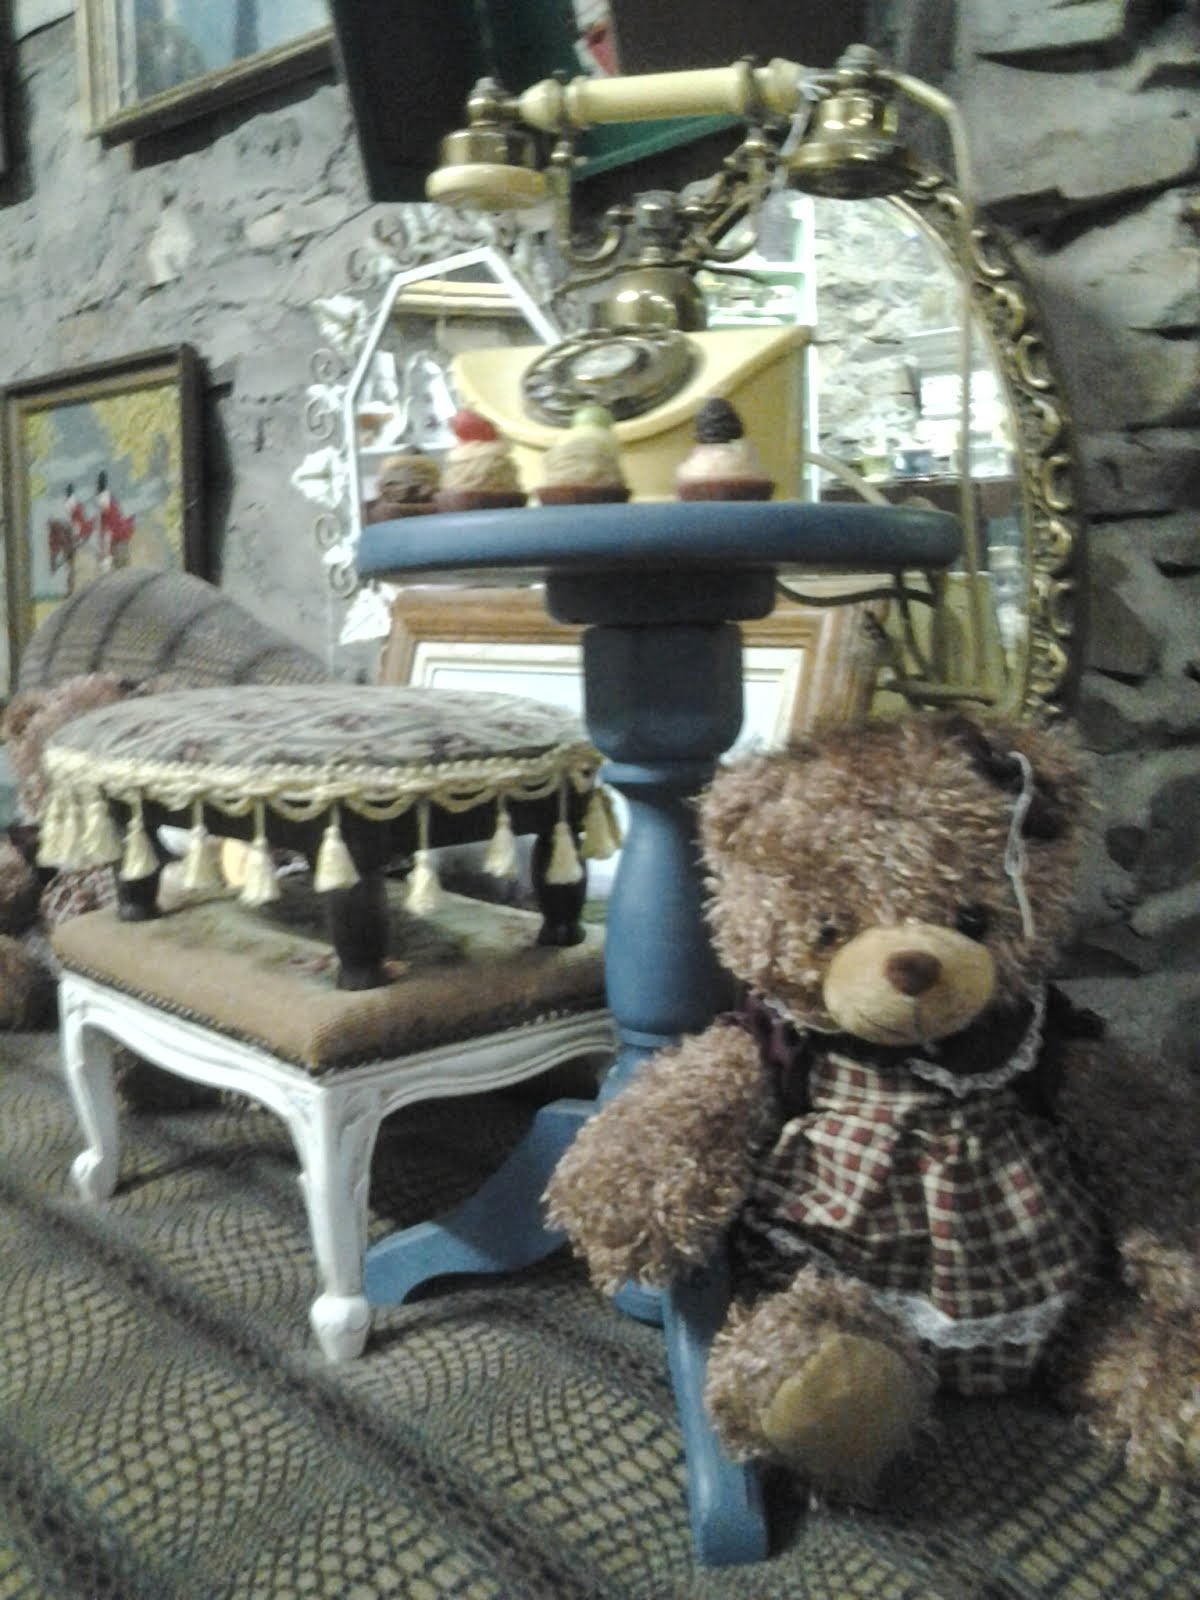 HEY JUDE'S ANTIQUES BARN - the Best deals in an 188 year old stone BARN!